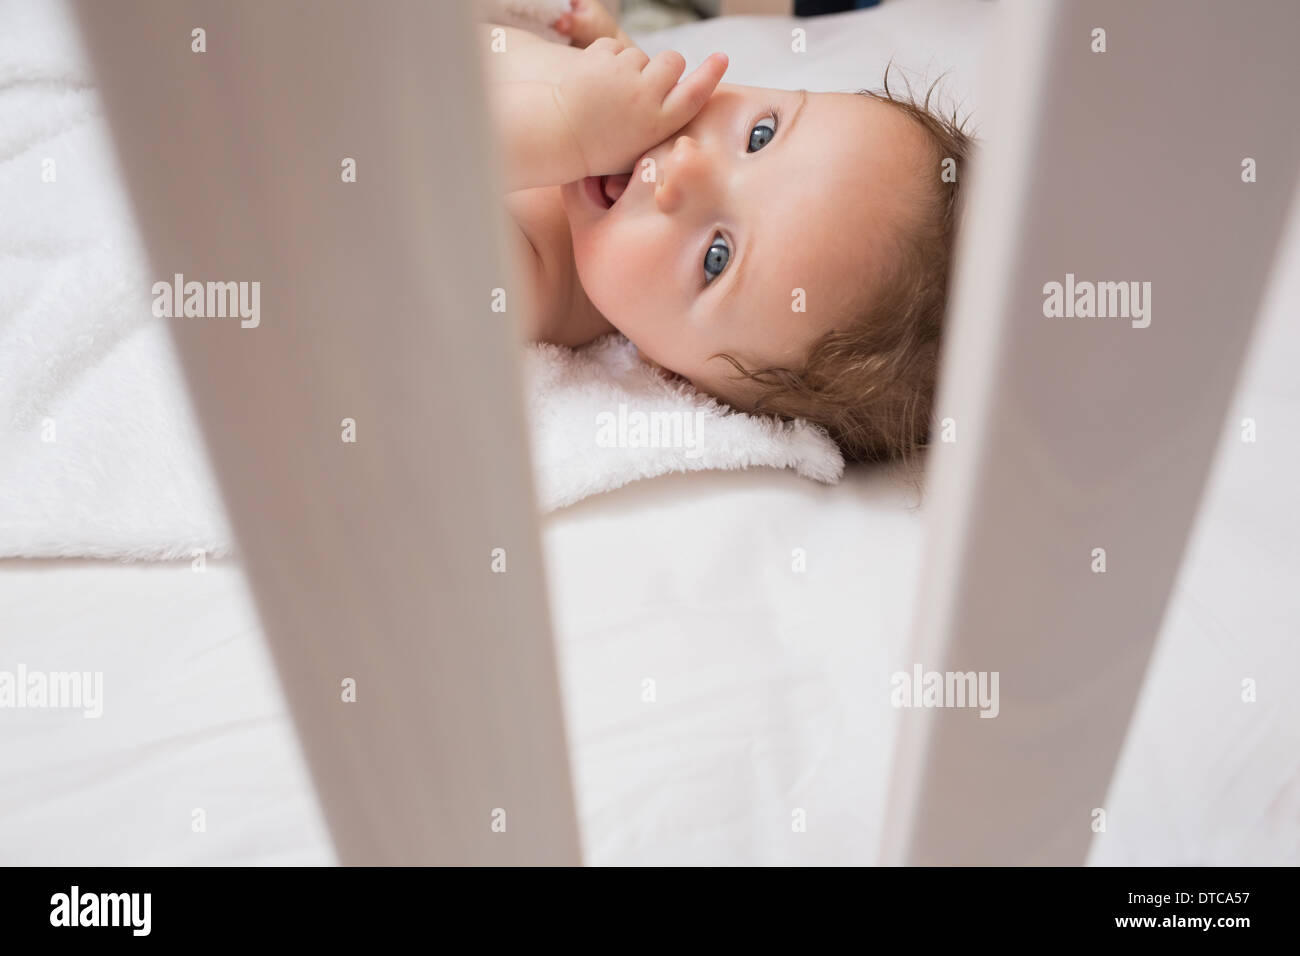 Lovely baby with finger in mouth Stock Photo